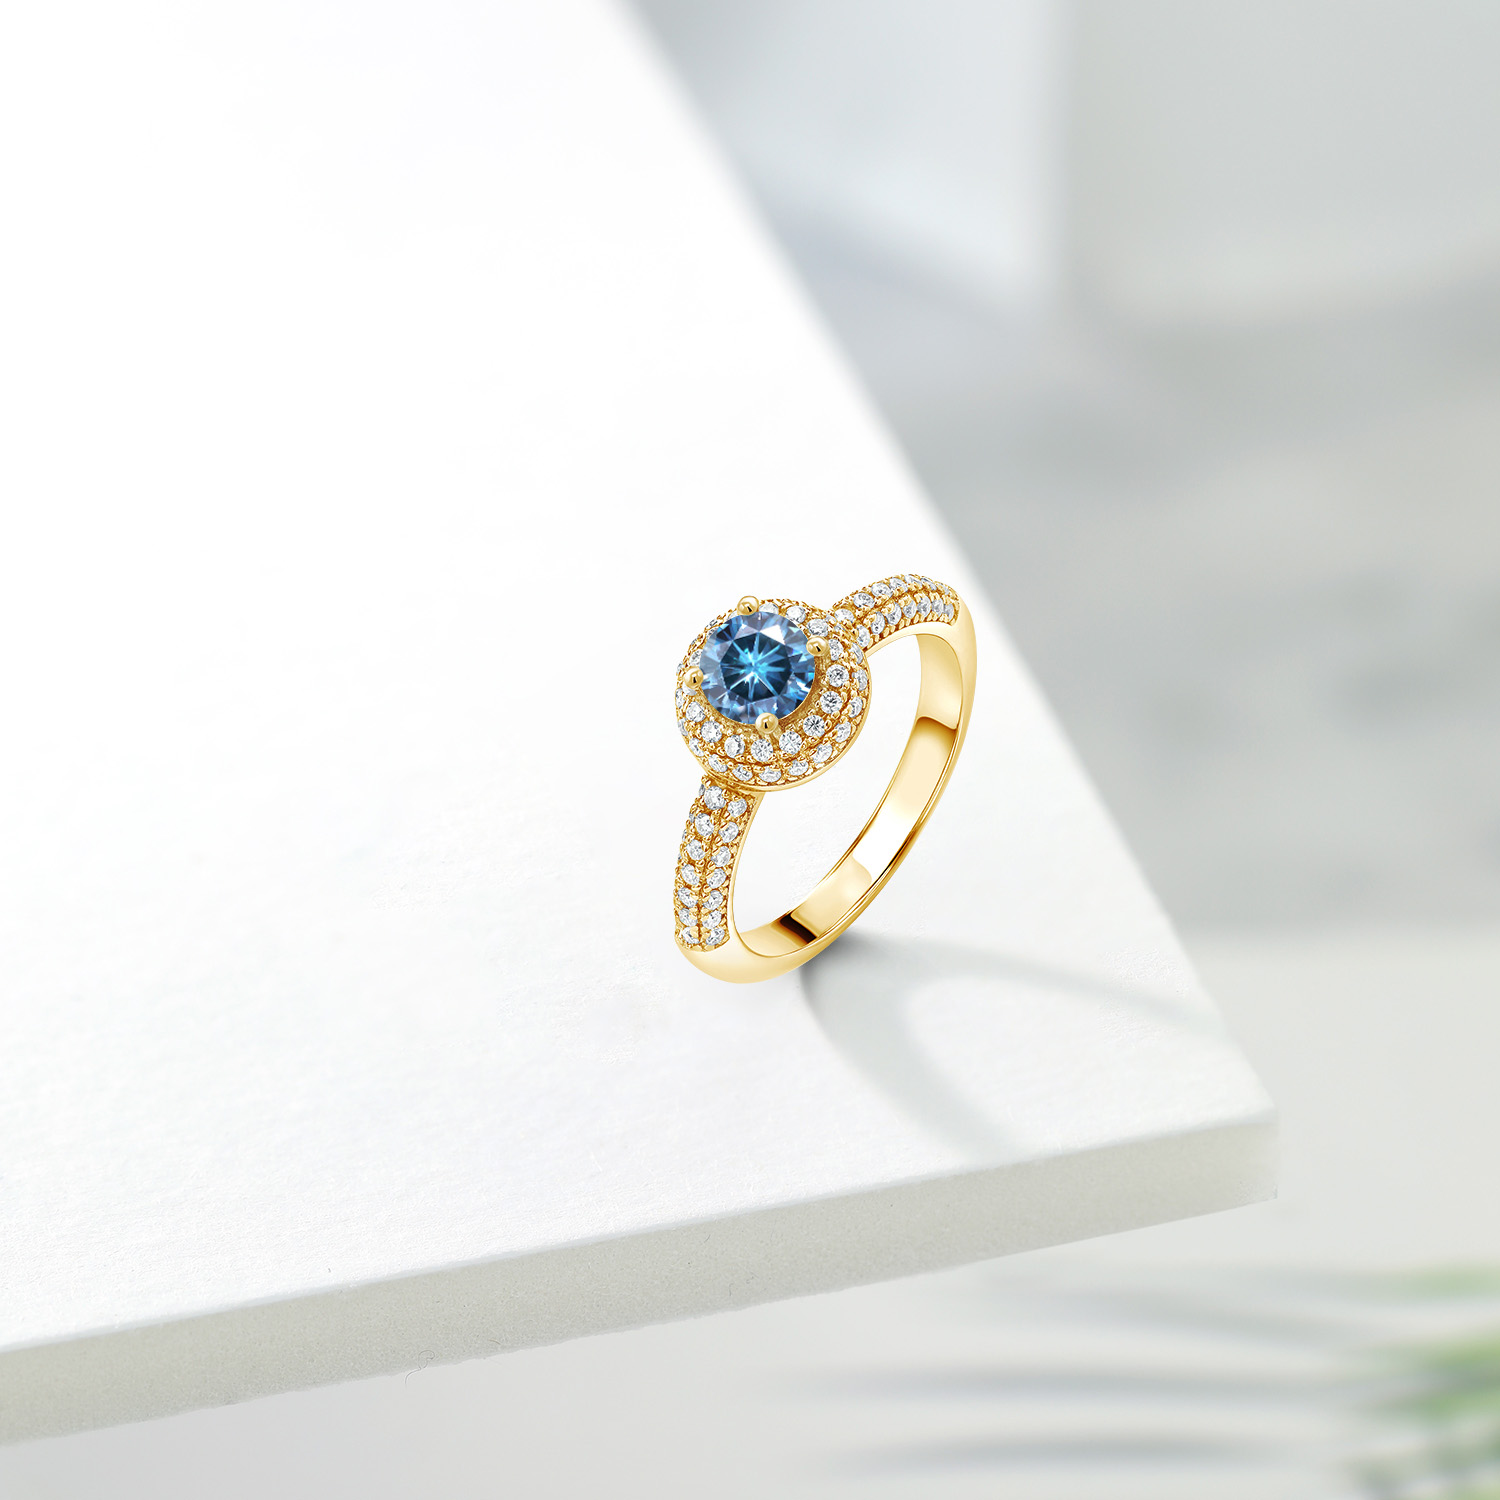 Gem Stone King 18K Yellow Gold Plated Silver Ring Persian Blue Created Moissanite Created Moissanite (1.06 Cttw)